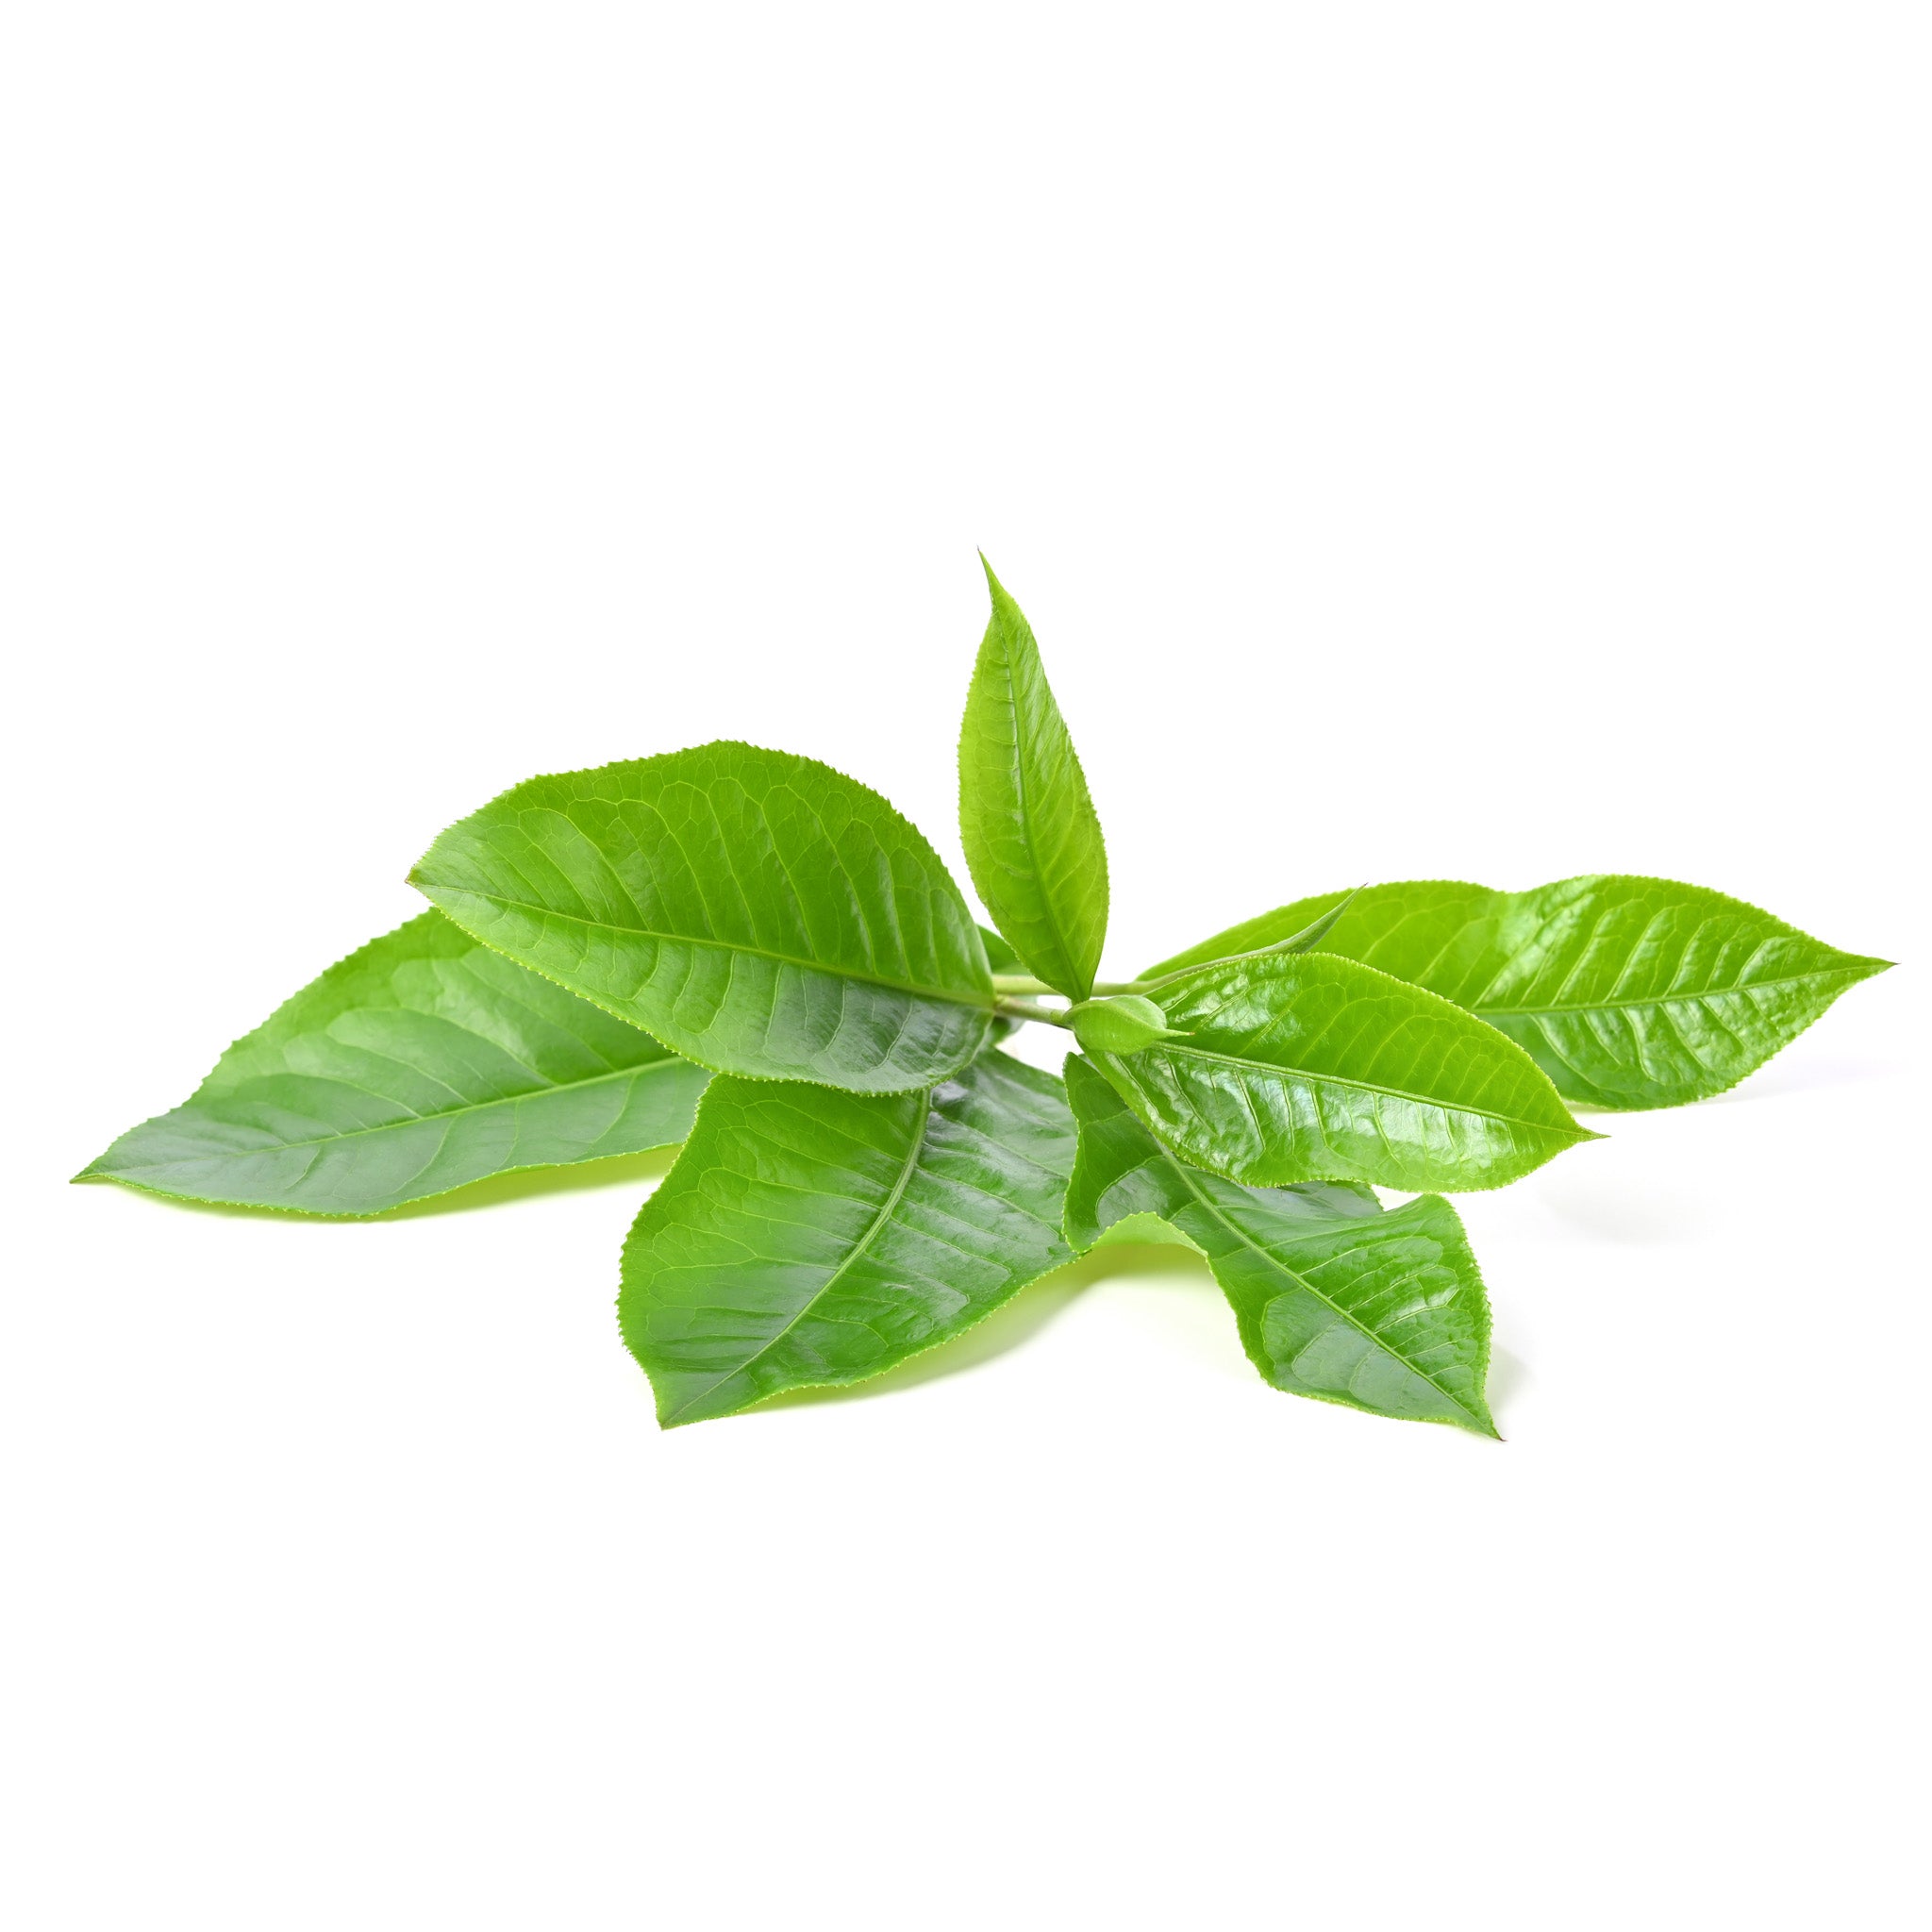 Camellia Sinensis (Green Tea) Extract: Antioxidant, helps fight the appearance of fine line and wrinkles